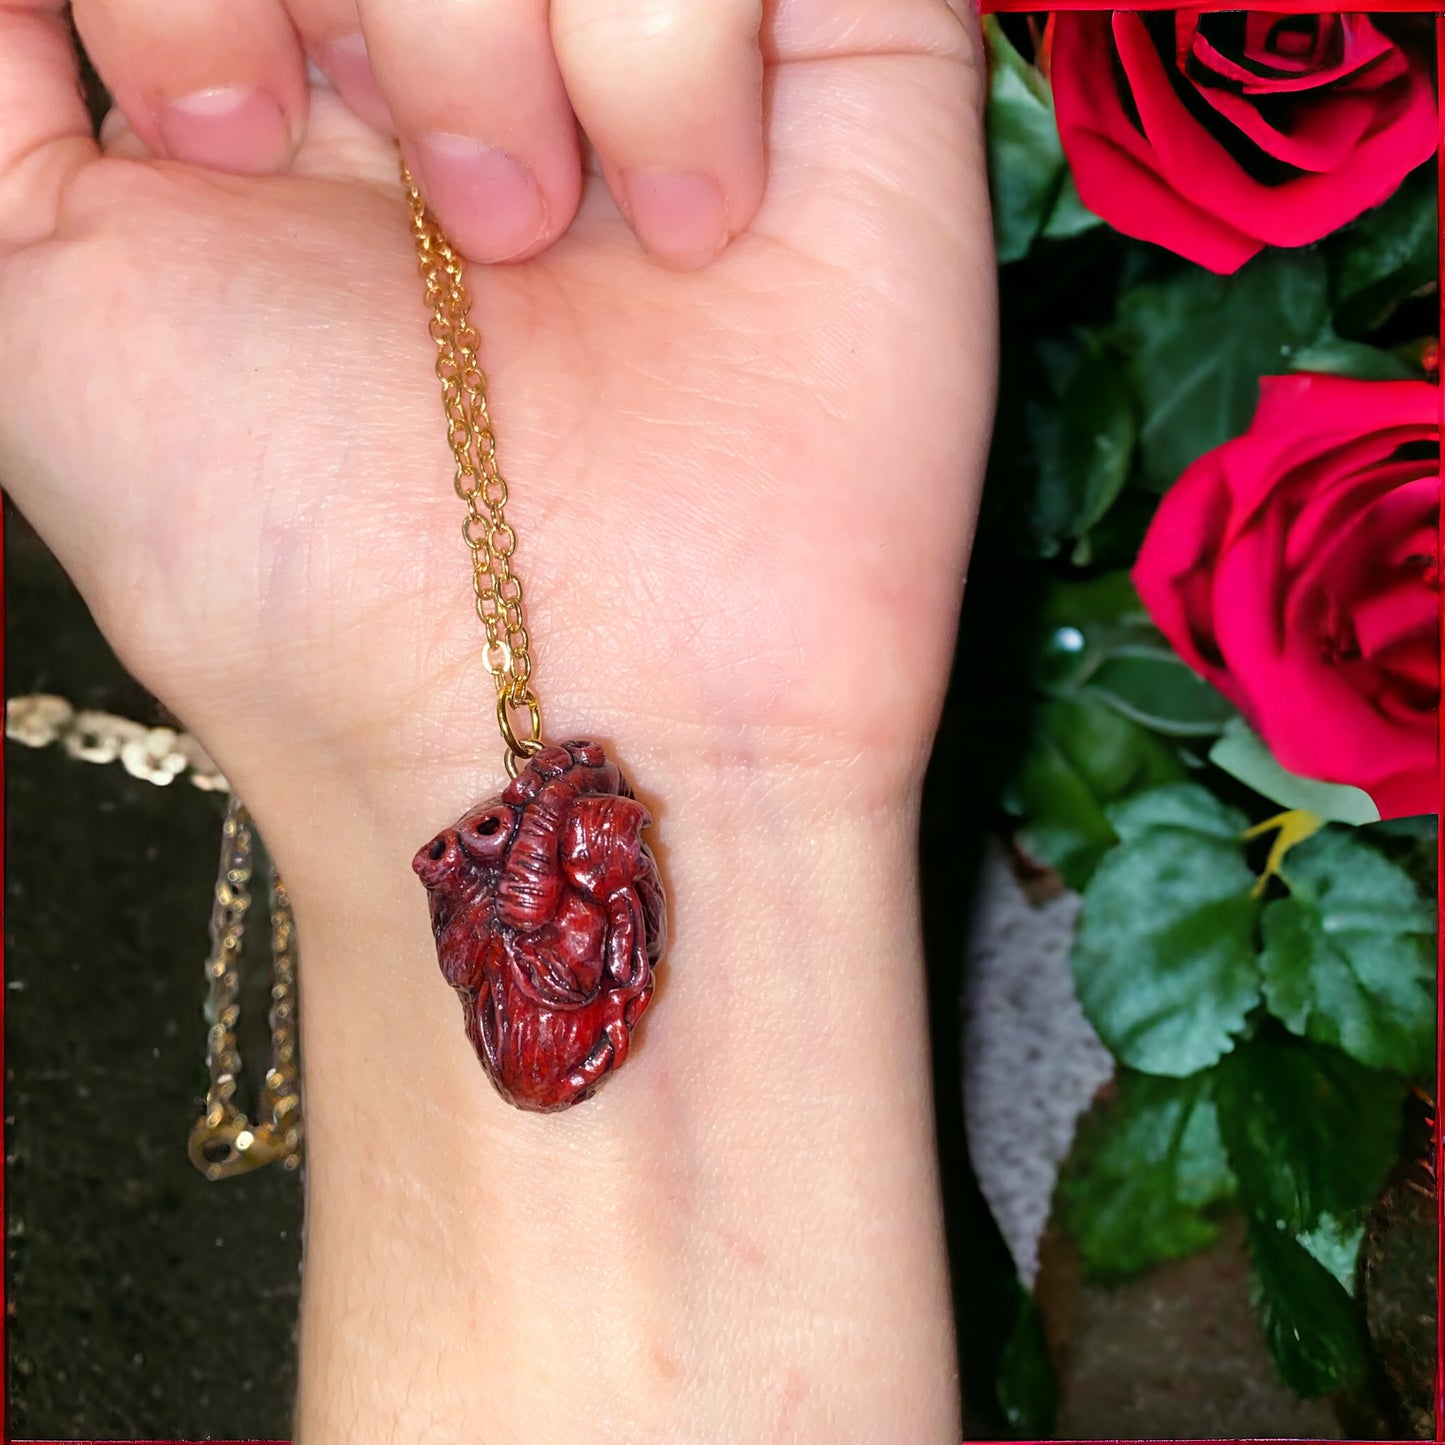 "Bloody Valentine" hand-sculpted anatomical heart pendant.